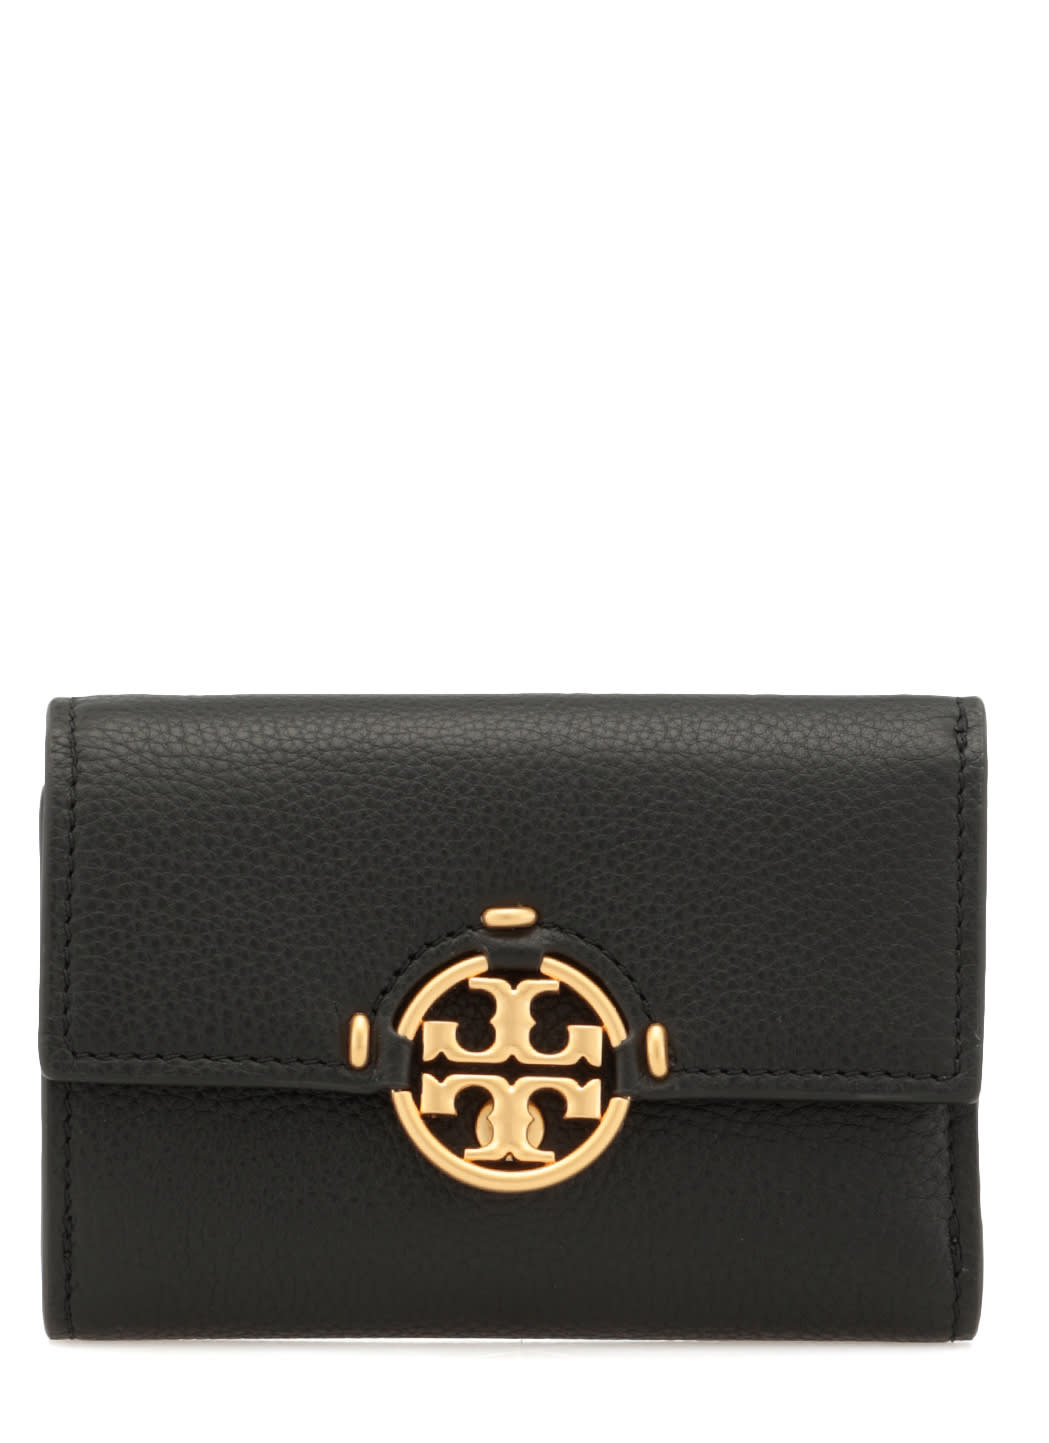 Tory Burch Pebbled Leather Wallet